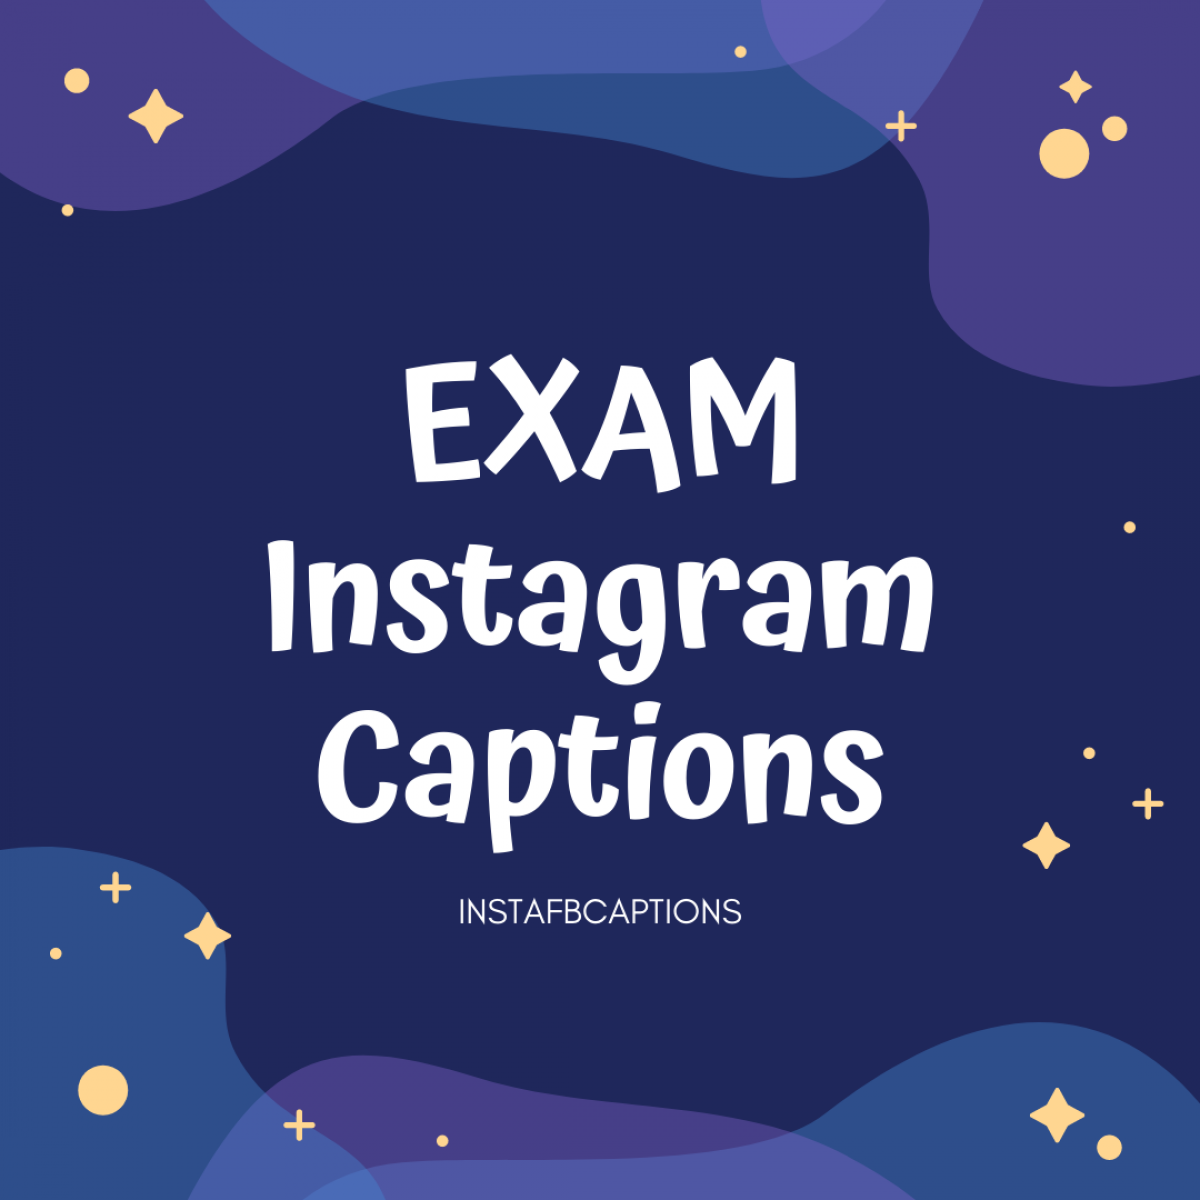 New] EXAM Captions for Students Instagram in 2023